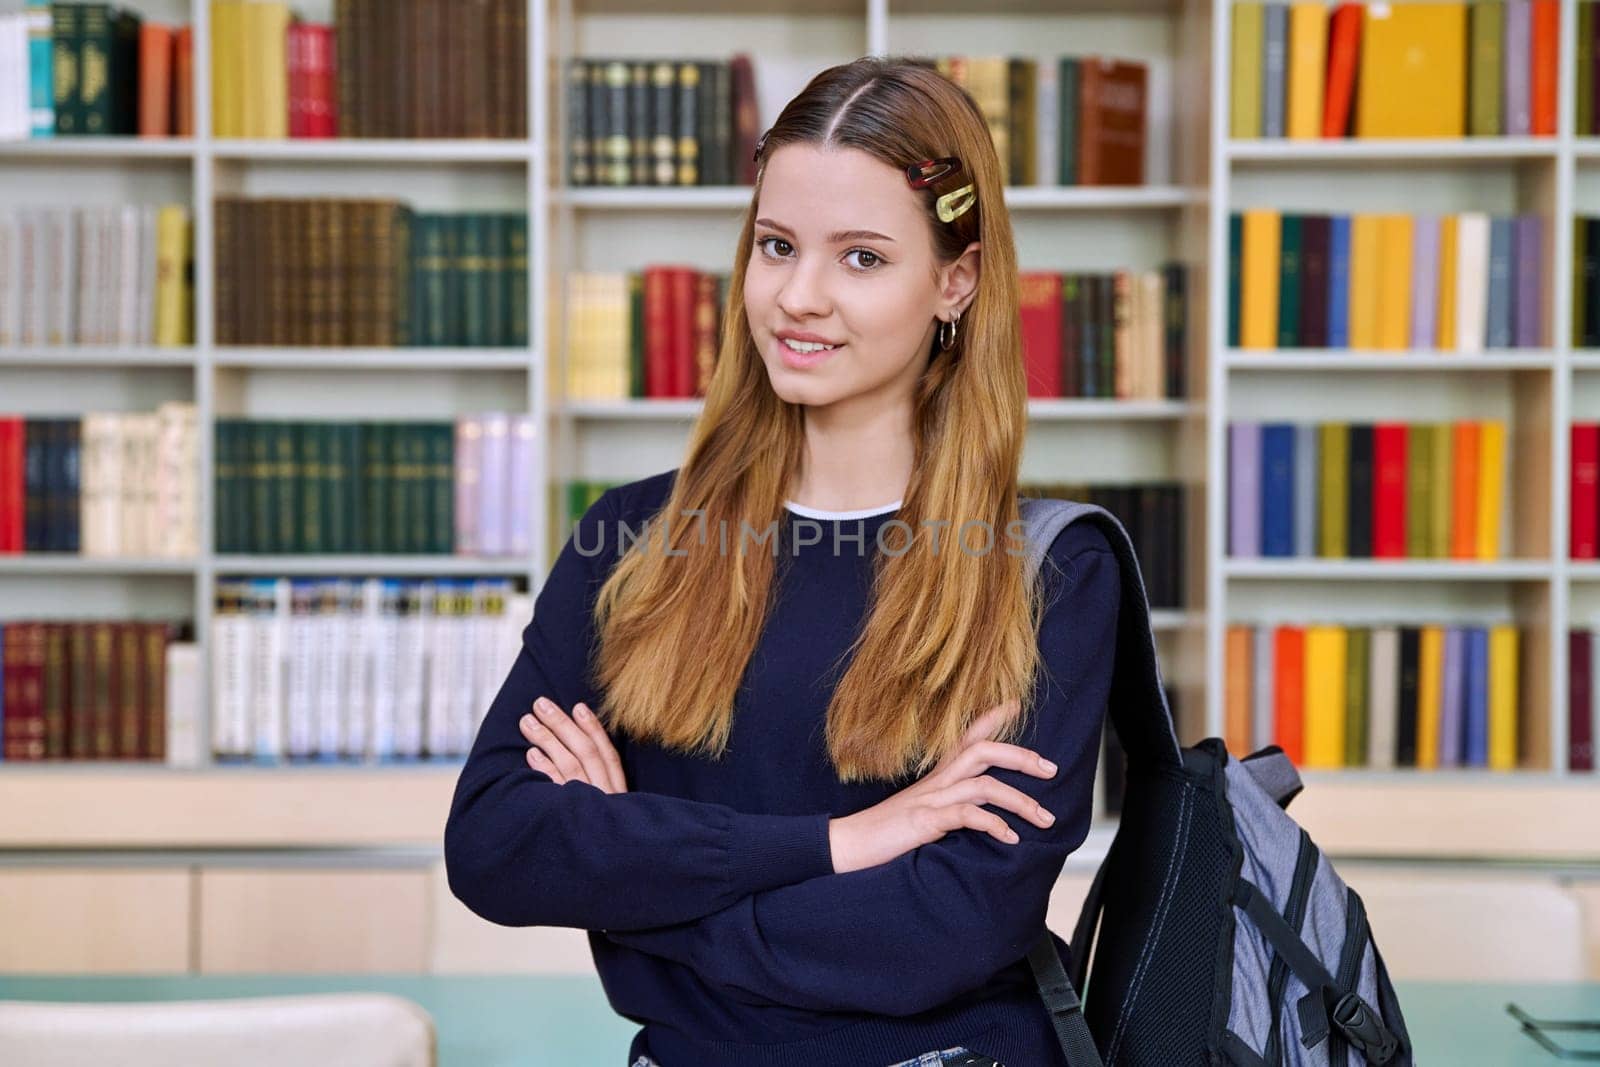 Portrait of high school student girl with backpack in library classroom. Red-haired teenage female 16, 17 years old looking at camera. Education, adolescence, school concept